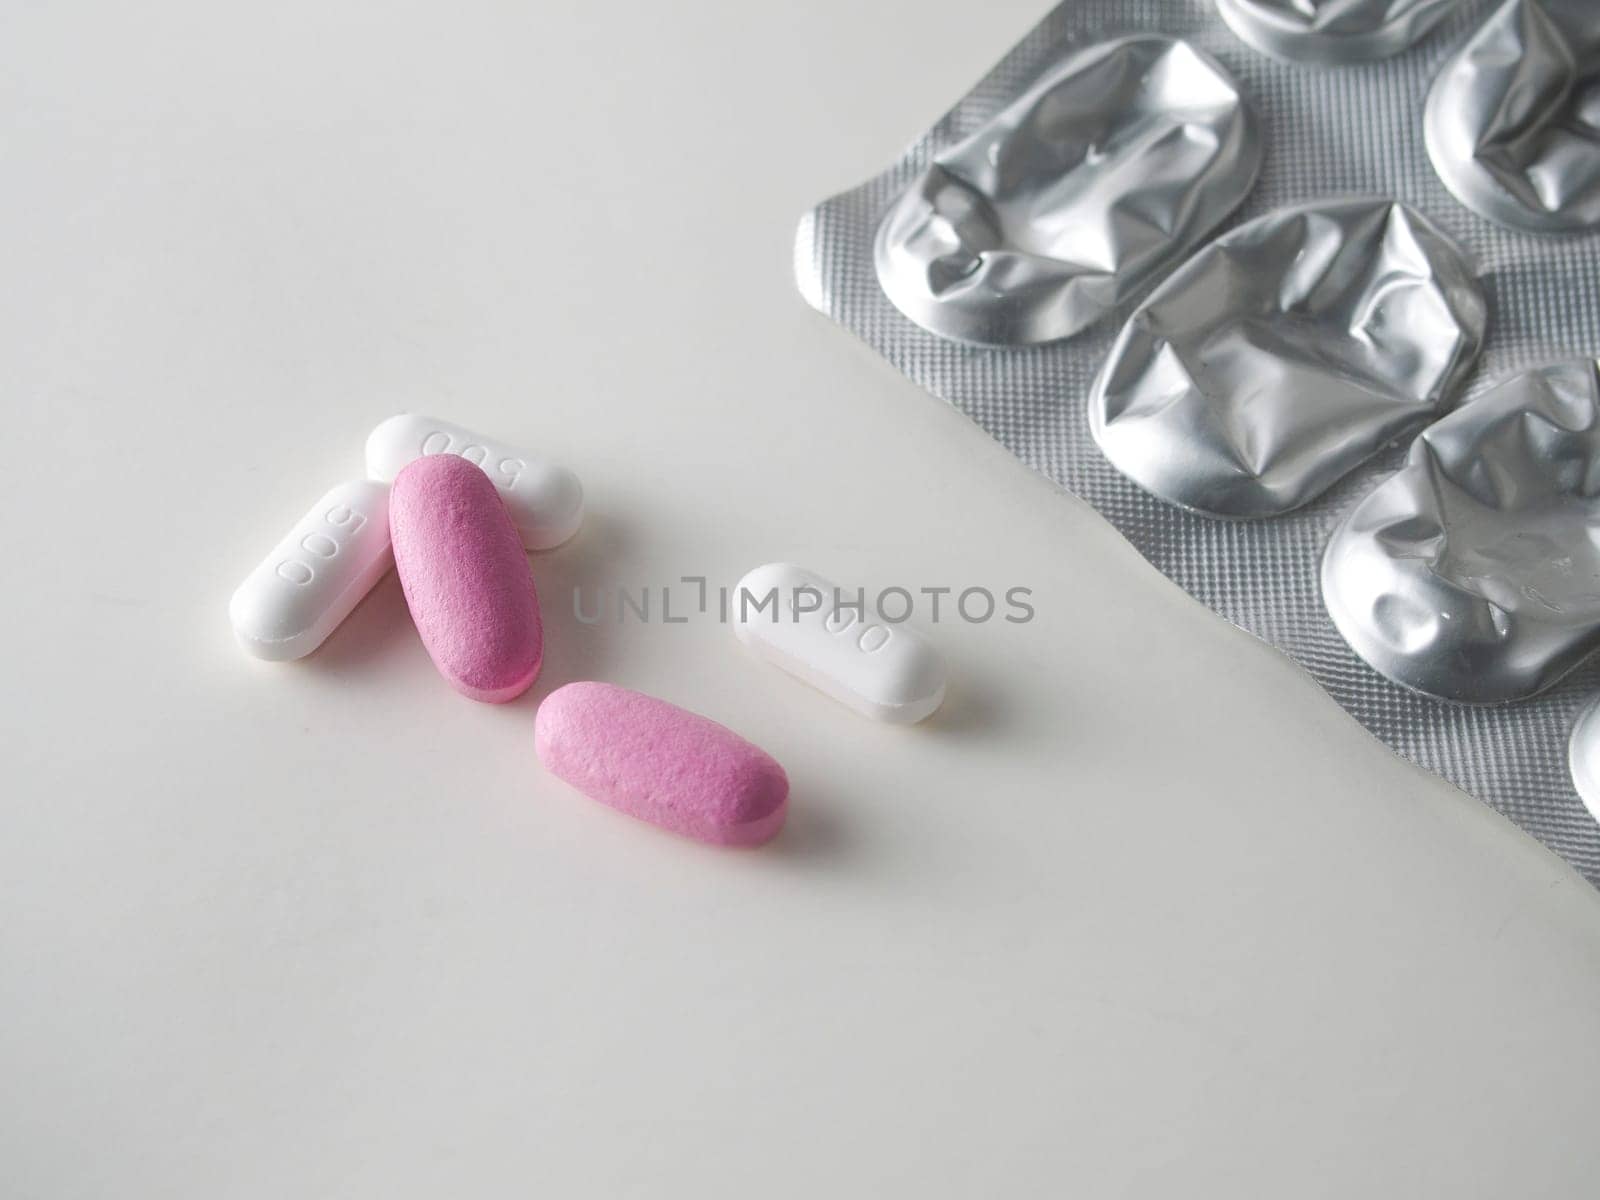 multicolored medical pills and packs of pills on a white table by Andre1ns